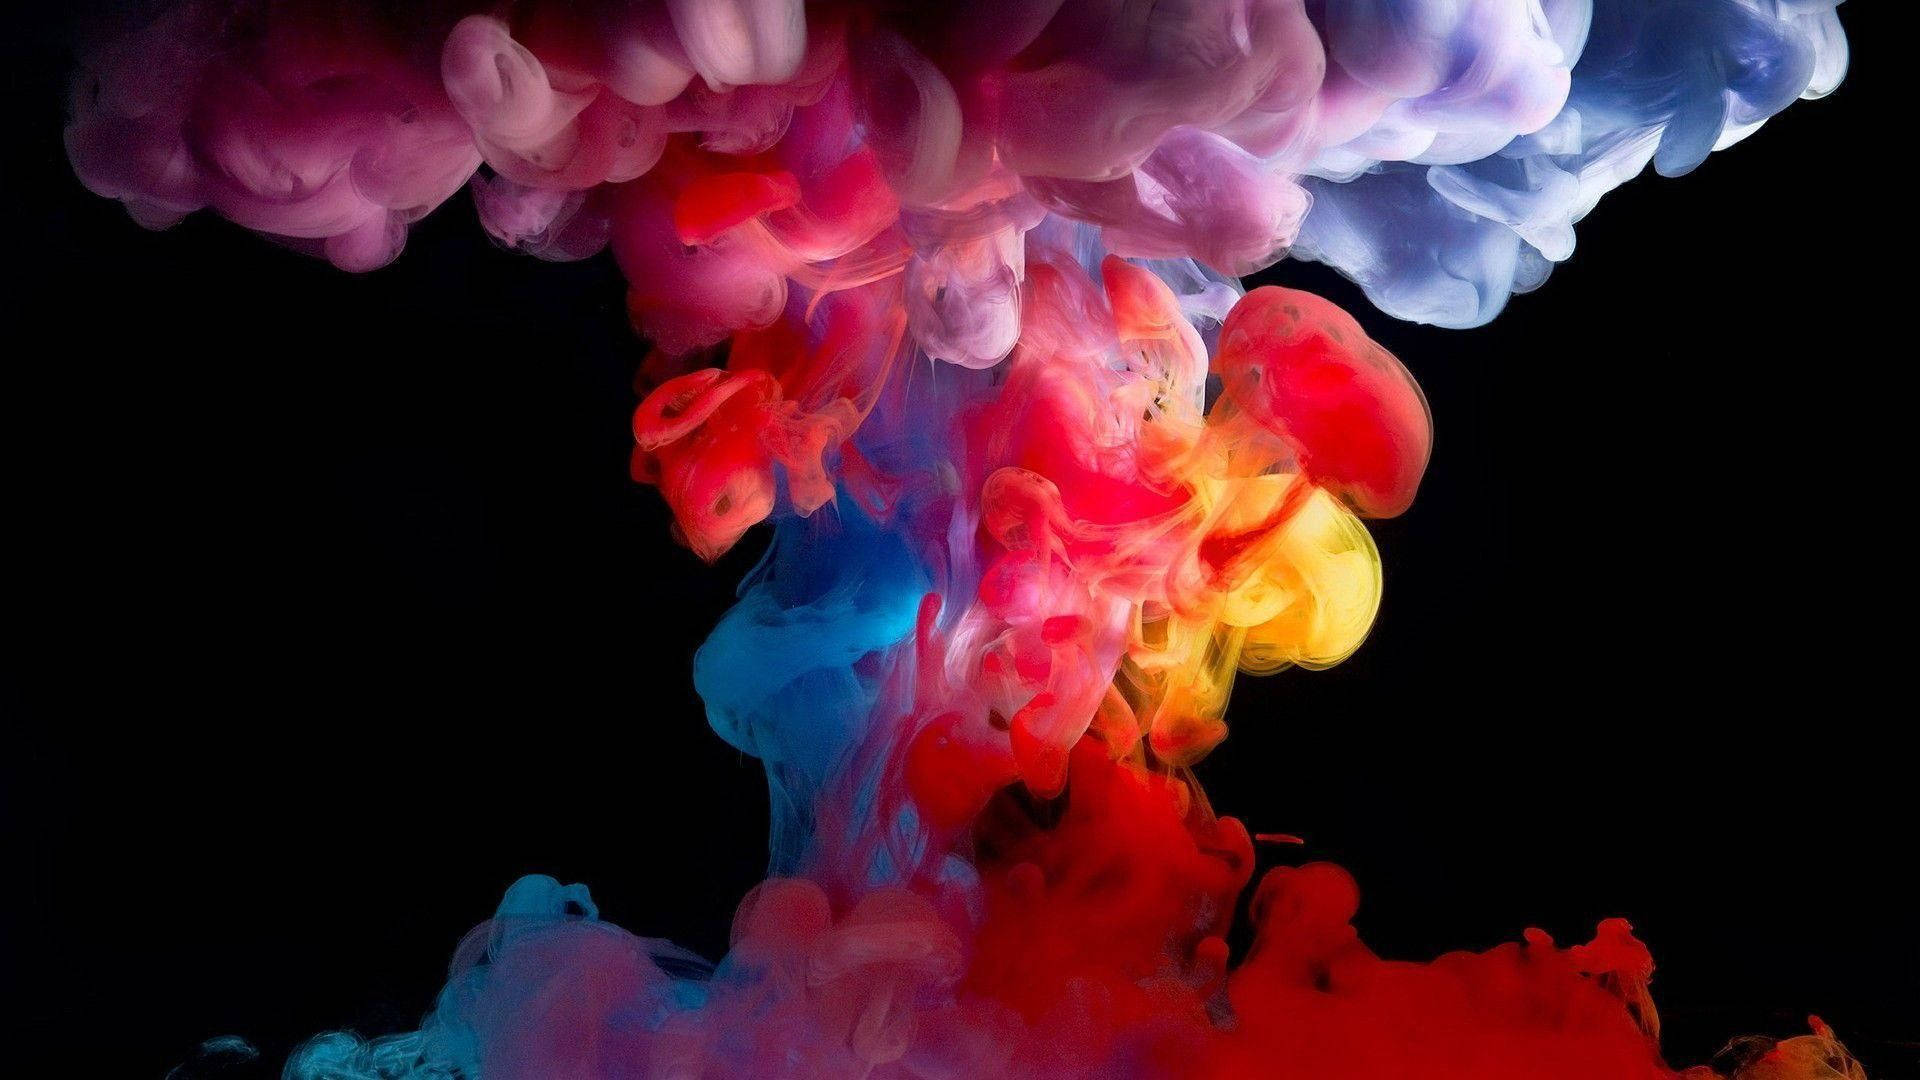 Intense And Colorful Clouds Of Smoke. Wallpaper